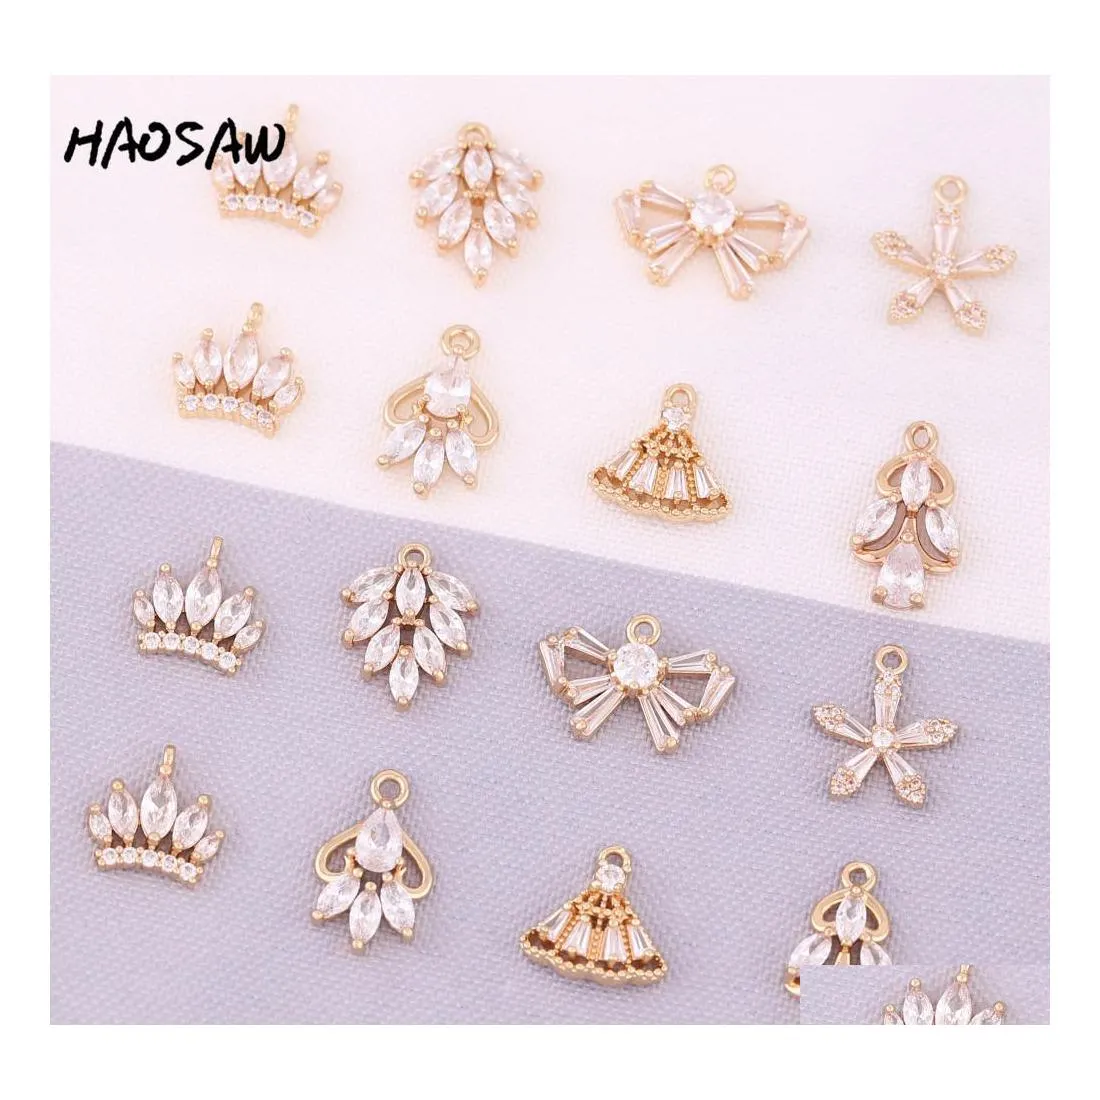 Chains Haosaw Choose 4Pcs Clear Crystal Charm/Flower/Bow/Fan/Crown/Cooper Accessory/Diy Jewelry Making/Earring Findings Drop Deliver Dhjkx